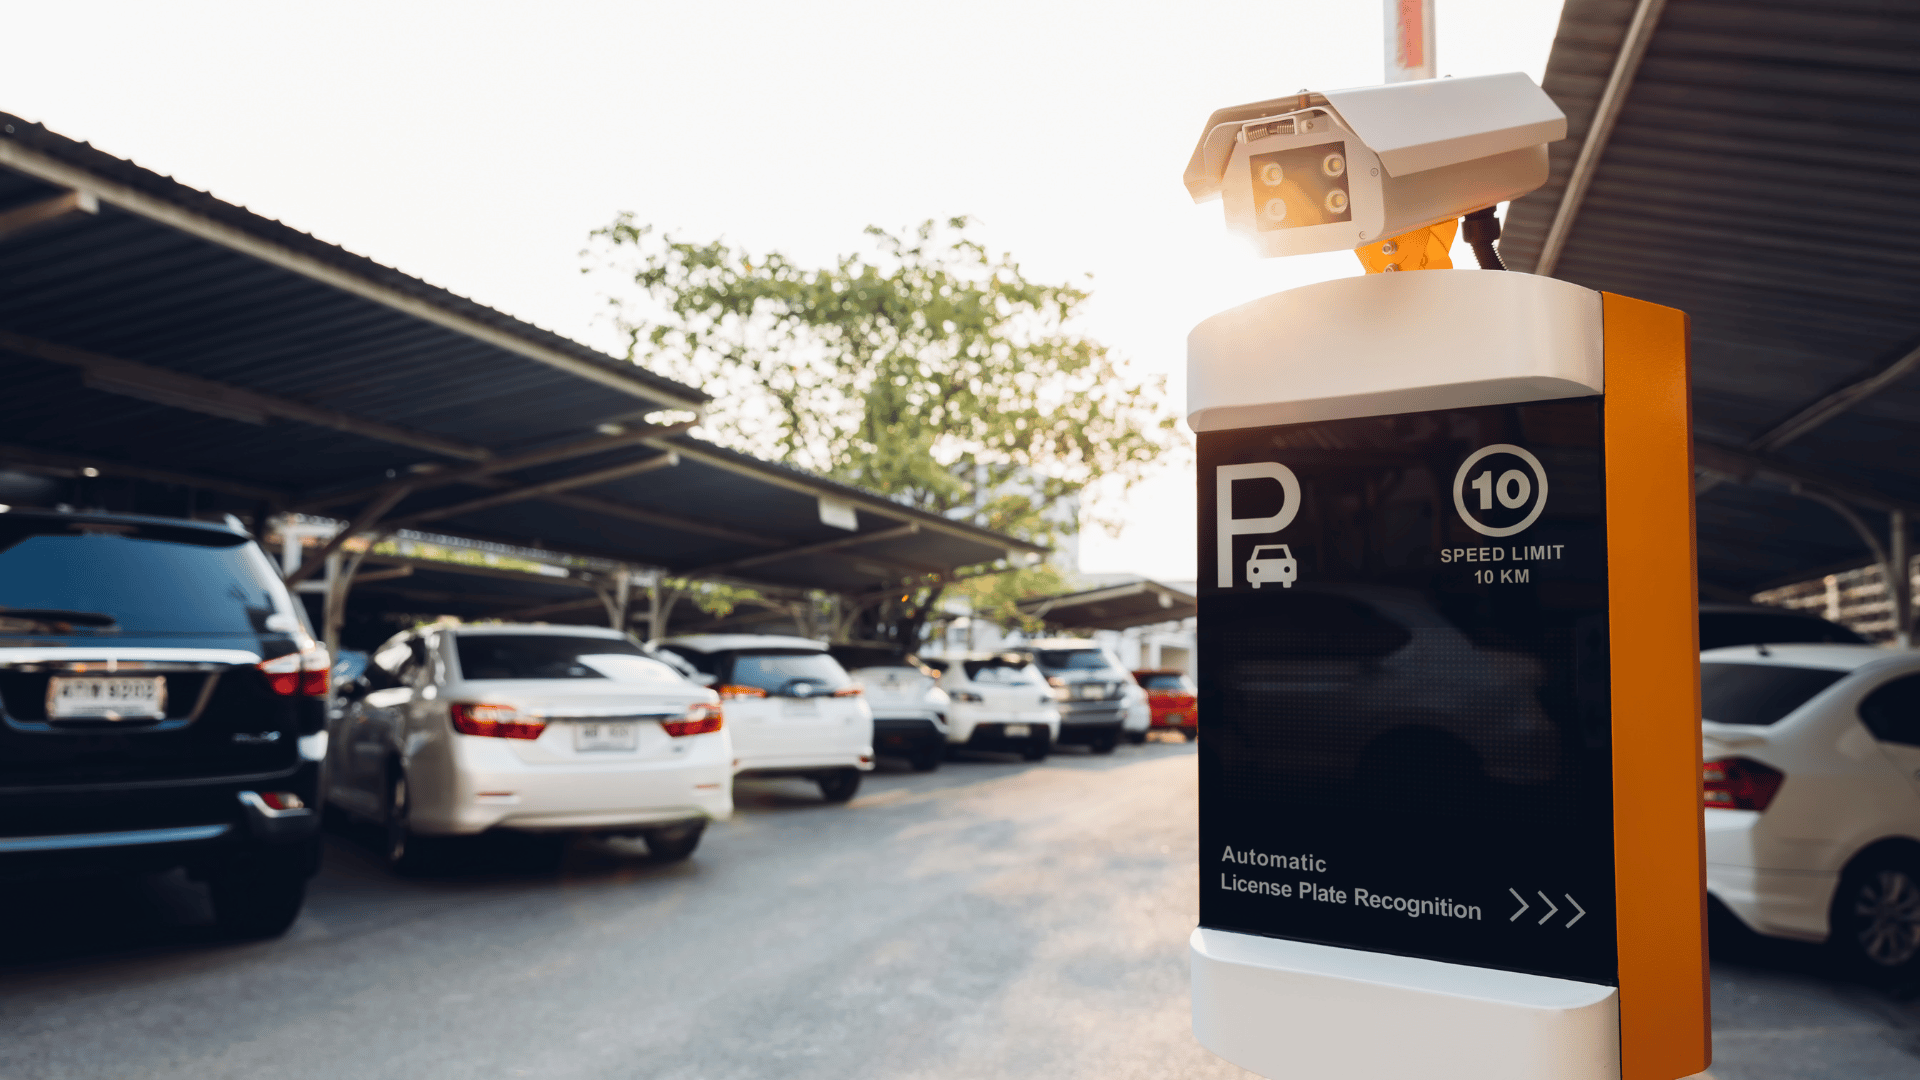 Reasons Why LPR Camera Systems Are Essential for Parking Security